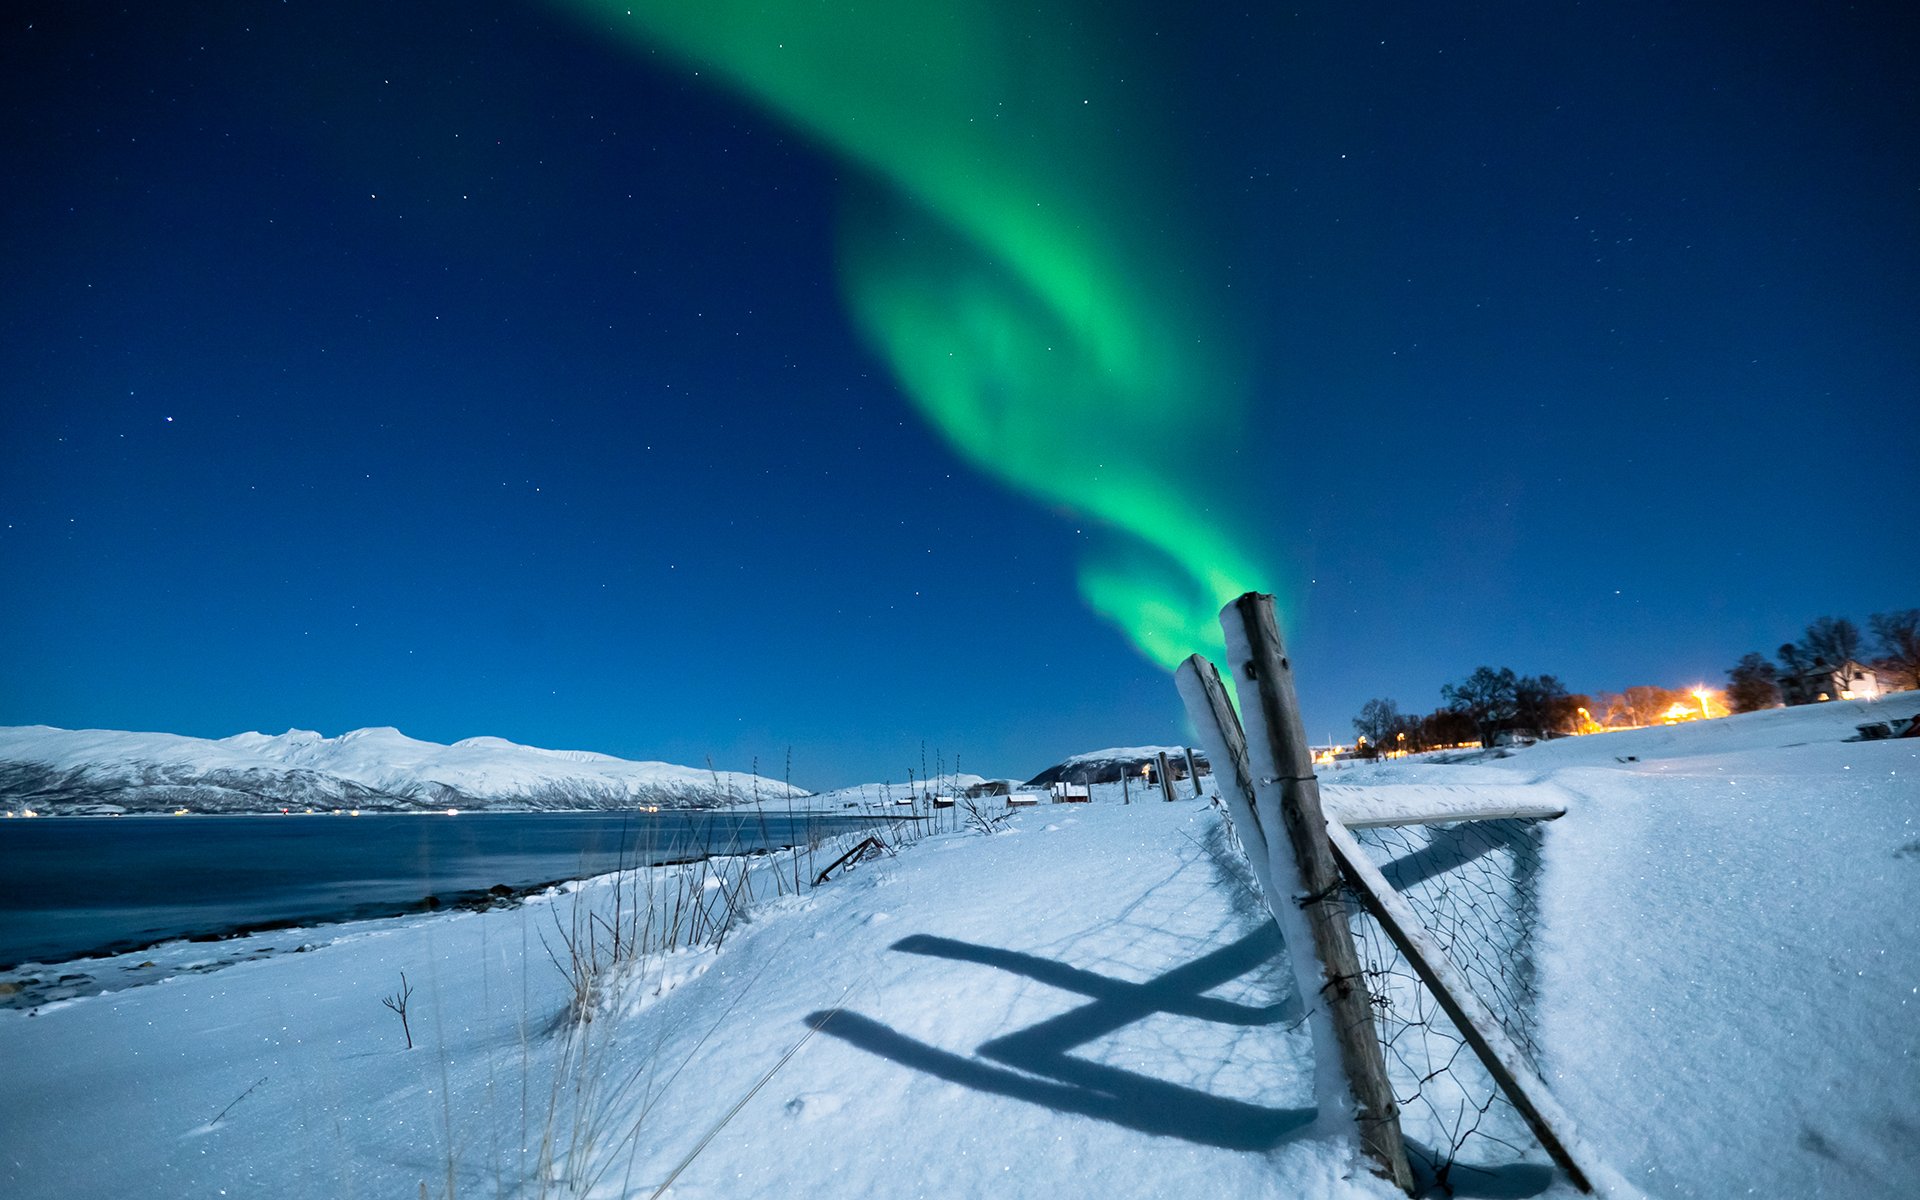 aurora, Borealis, Northern, Lights, Night, Green, Snow, Winter, Stars, Fence, Landscapes, Lakes, Sky Wallpaper HD / Desktop and Mobile Background